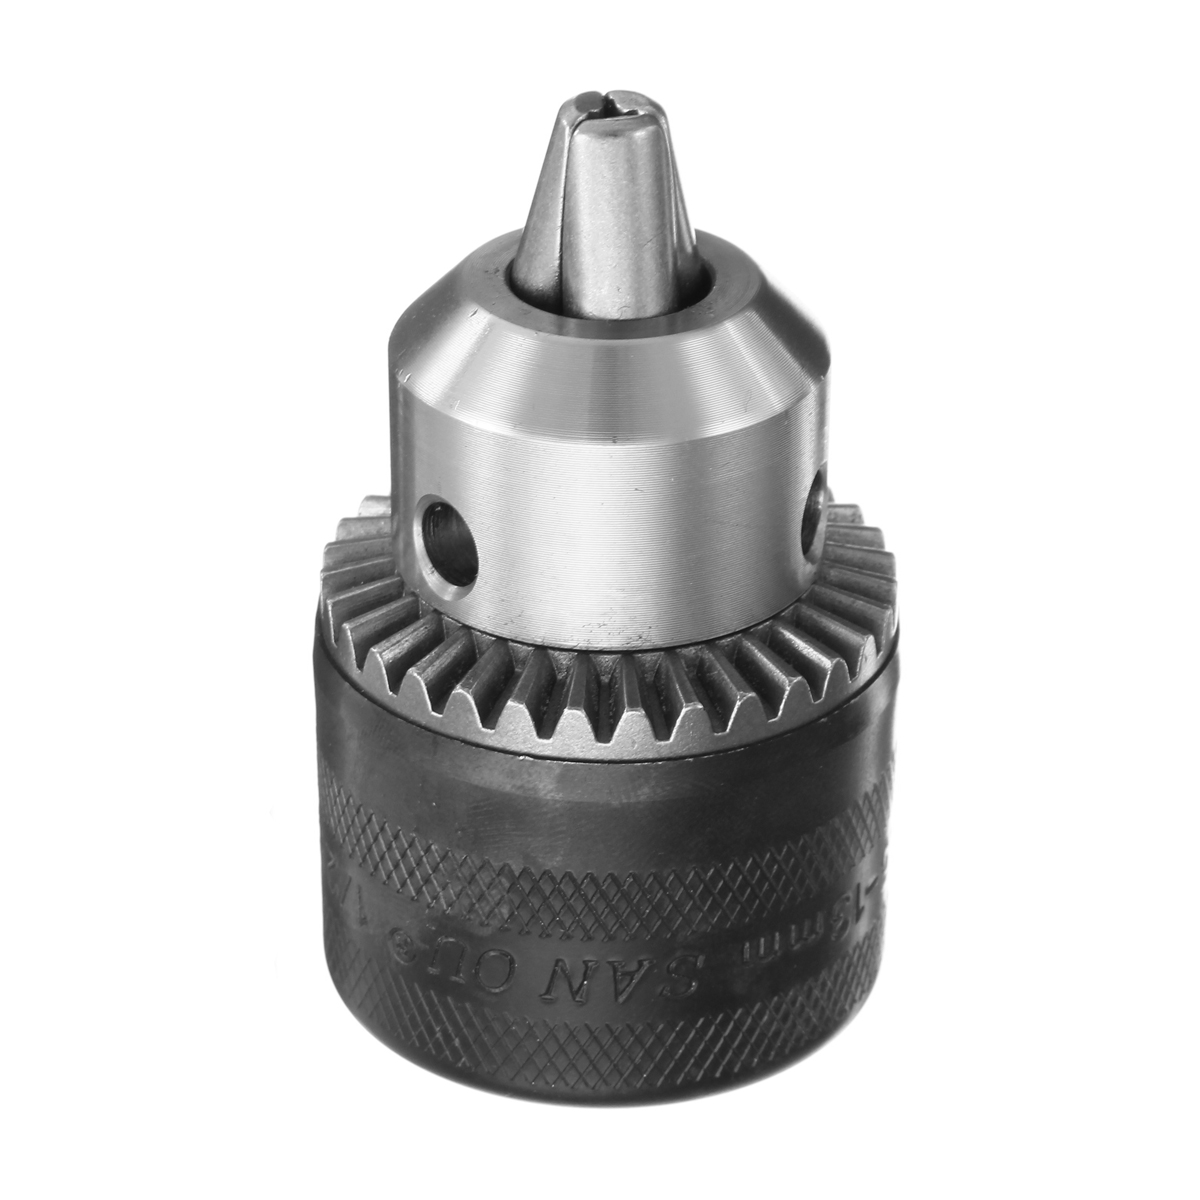 15-13mm-Metal-Stable-Keyed-Drill-Chuck-12-Inch-20-UNF-Thread-With-Connecting-Rod-1303419-5